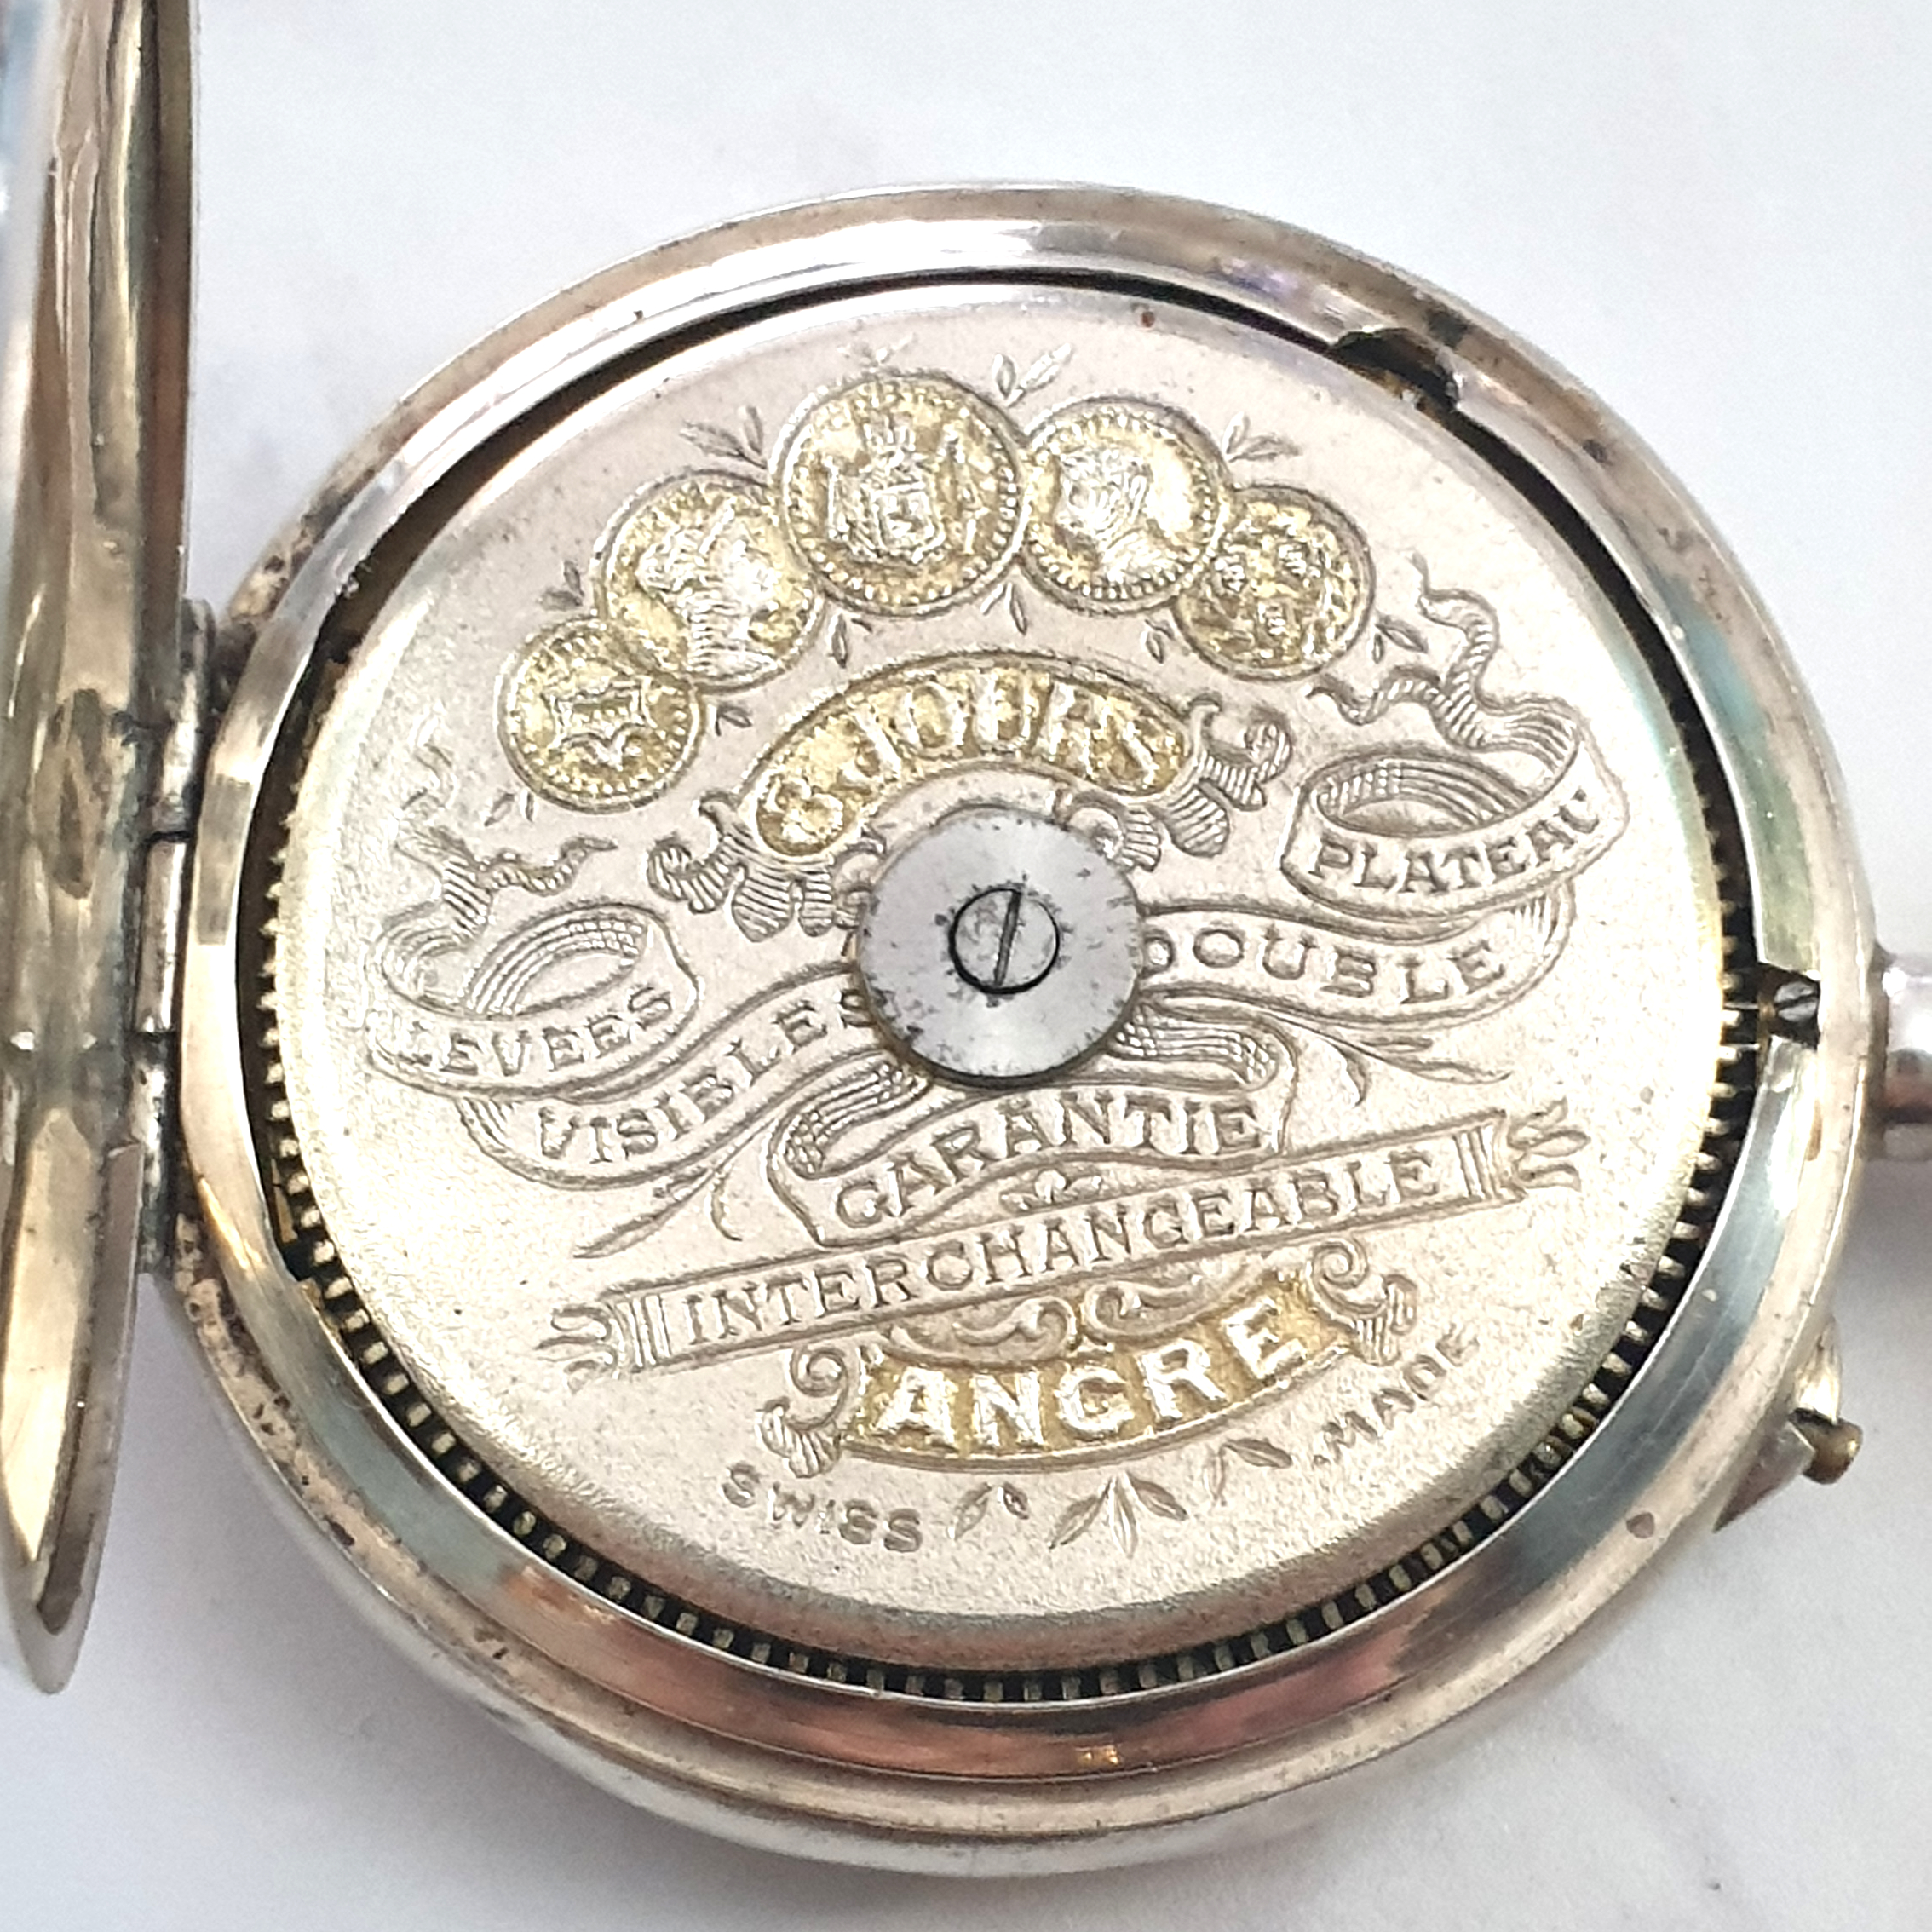 8 DAY HEBDOMAS TOP WIND POCKET WATCH WITH ENAMELLED DIAL AND VISIBLE ESCAPEMENT IN STERLING SILVER - Image 10 of 13